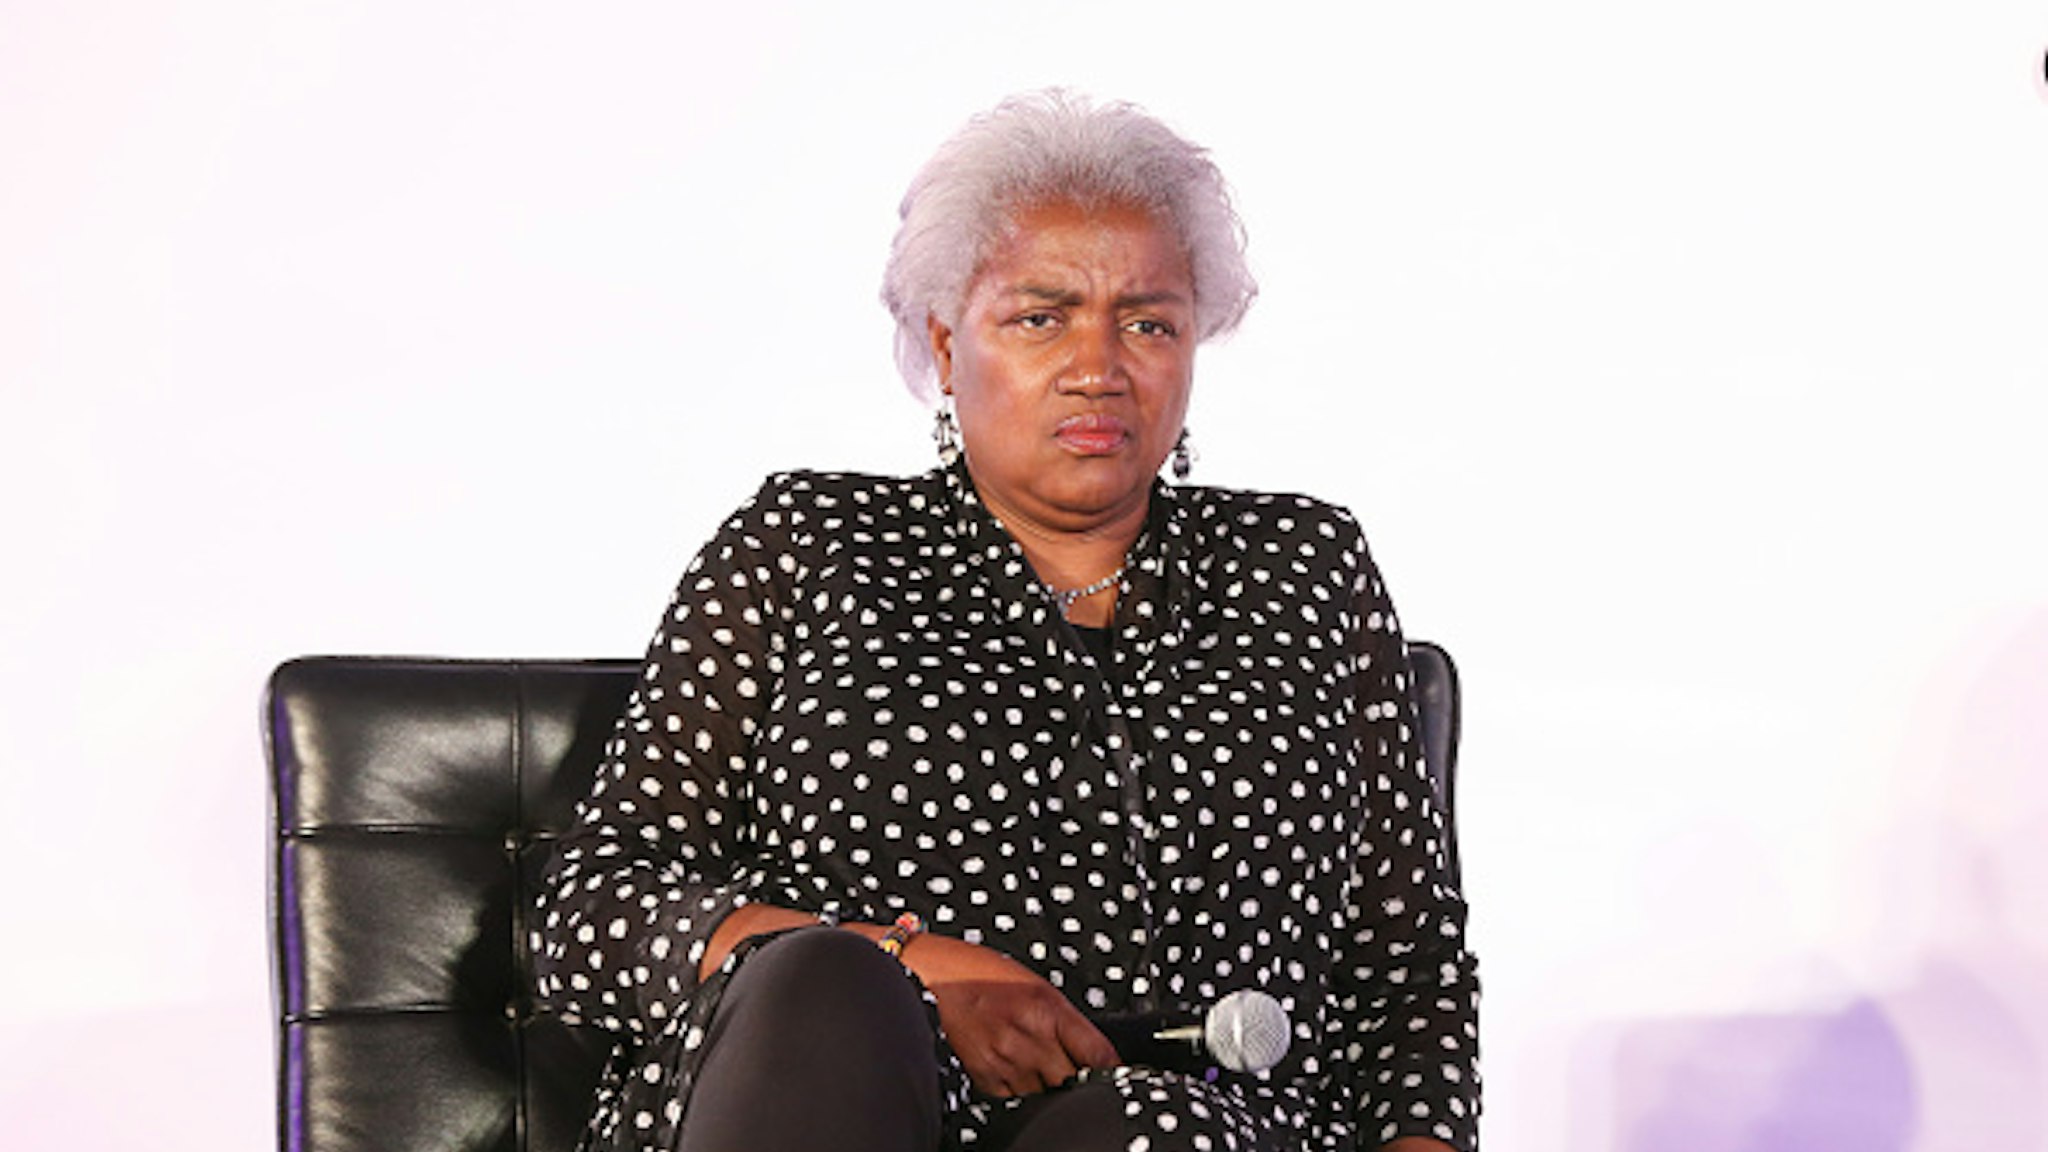 LOS ANGELES, CALIFORNIA - JUNE 20: Donna Brazile attends META Convened by BET at Milk Studios on June 20, 2019 in Los Angeles, California.